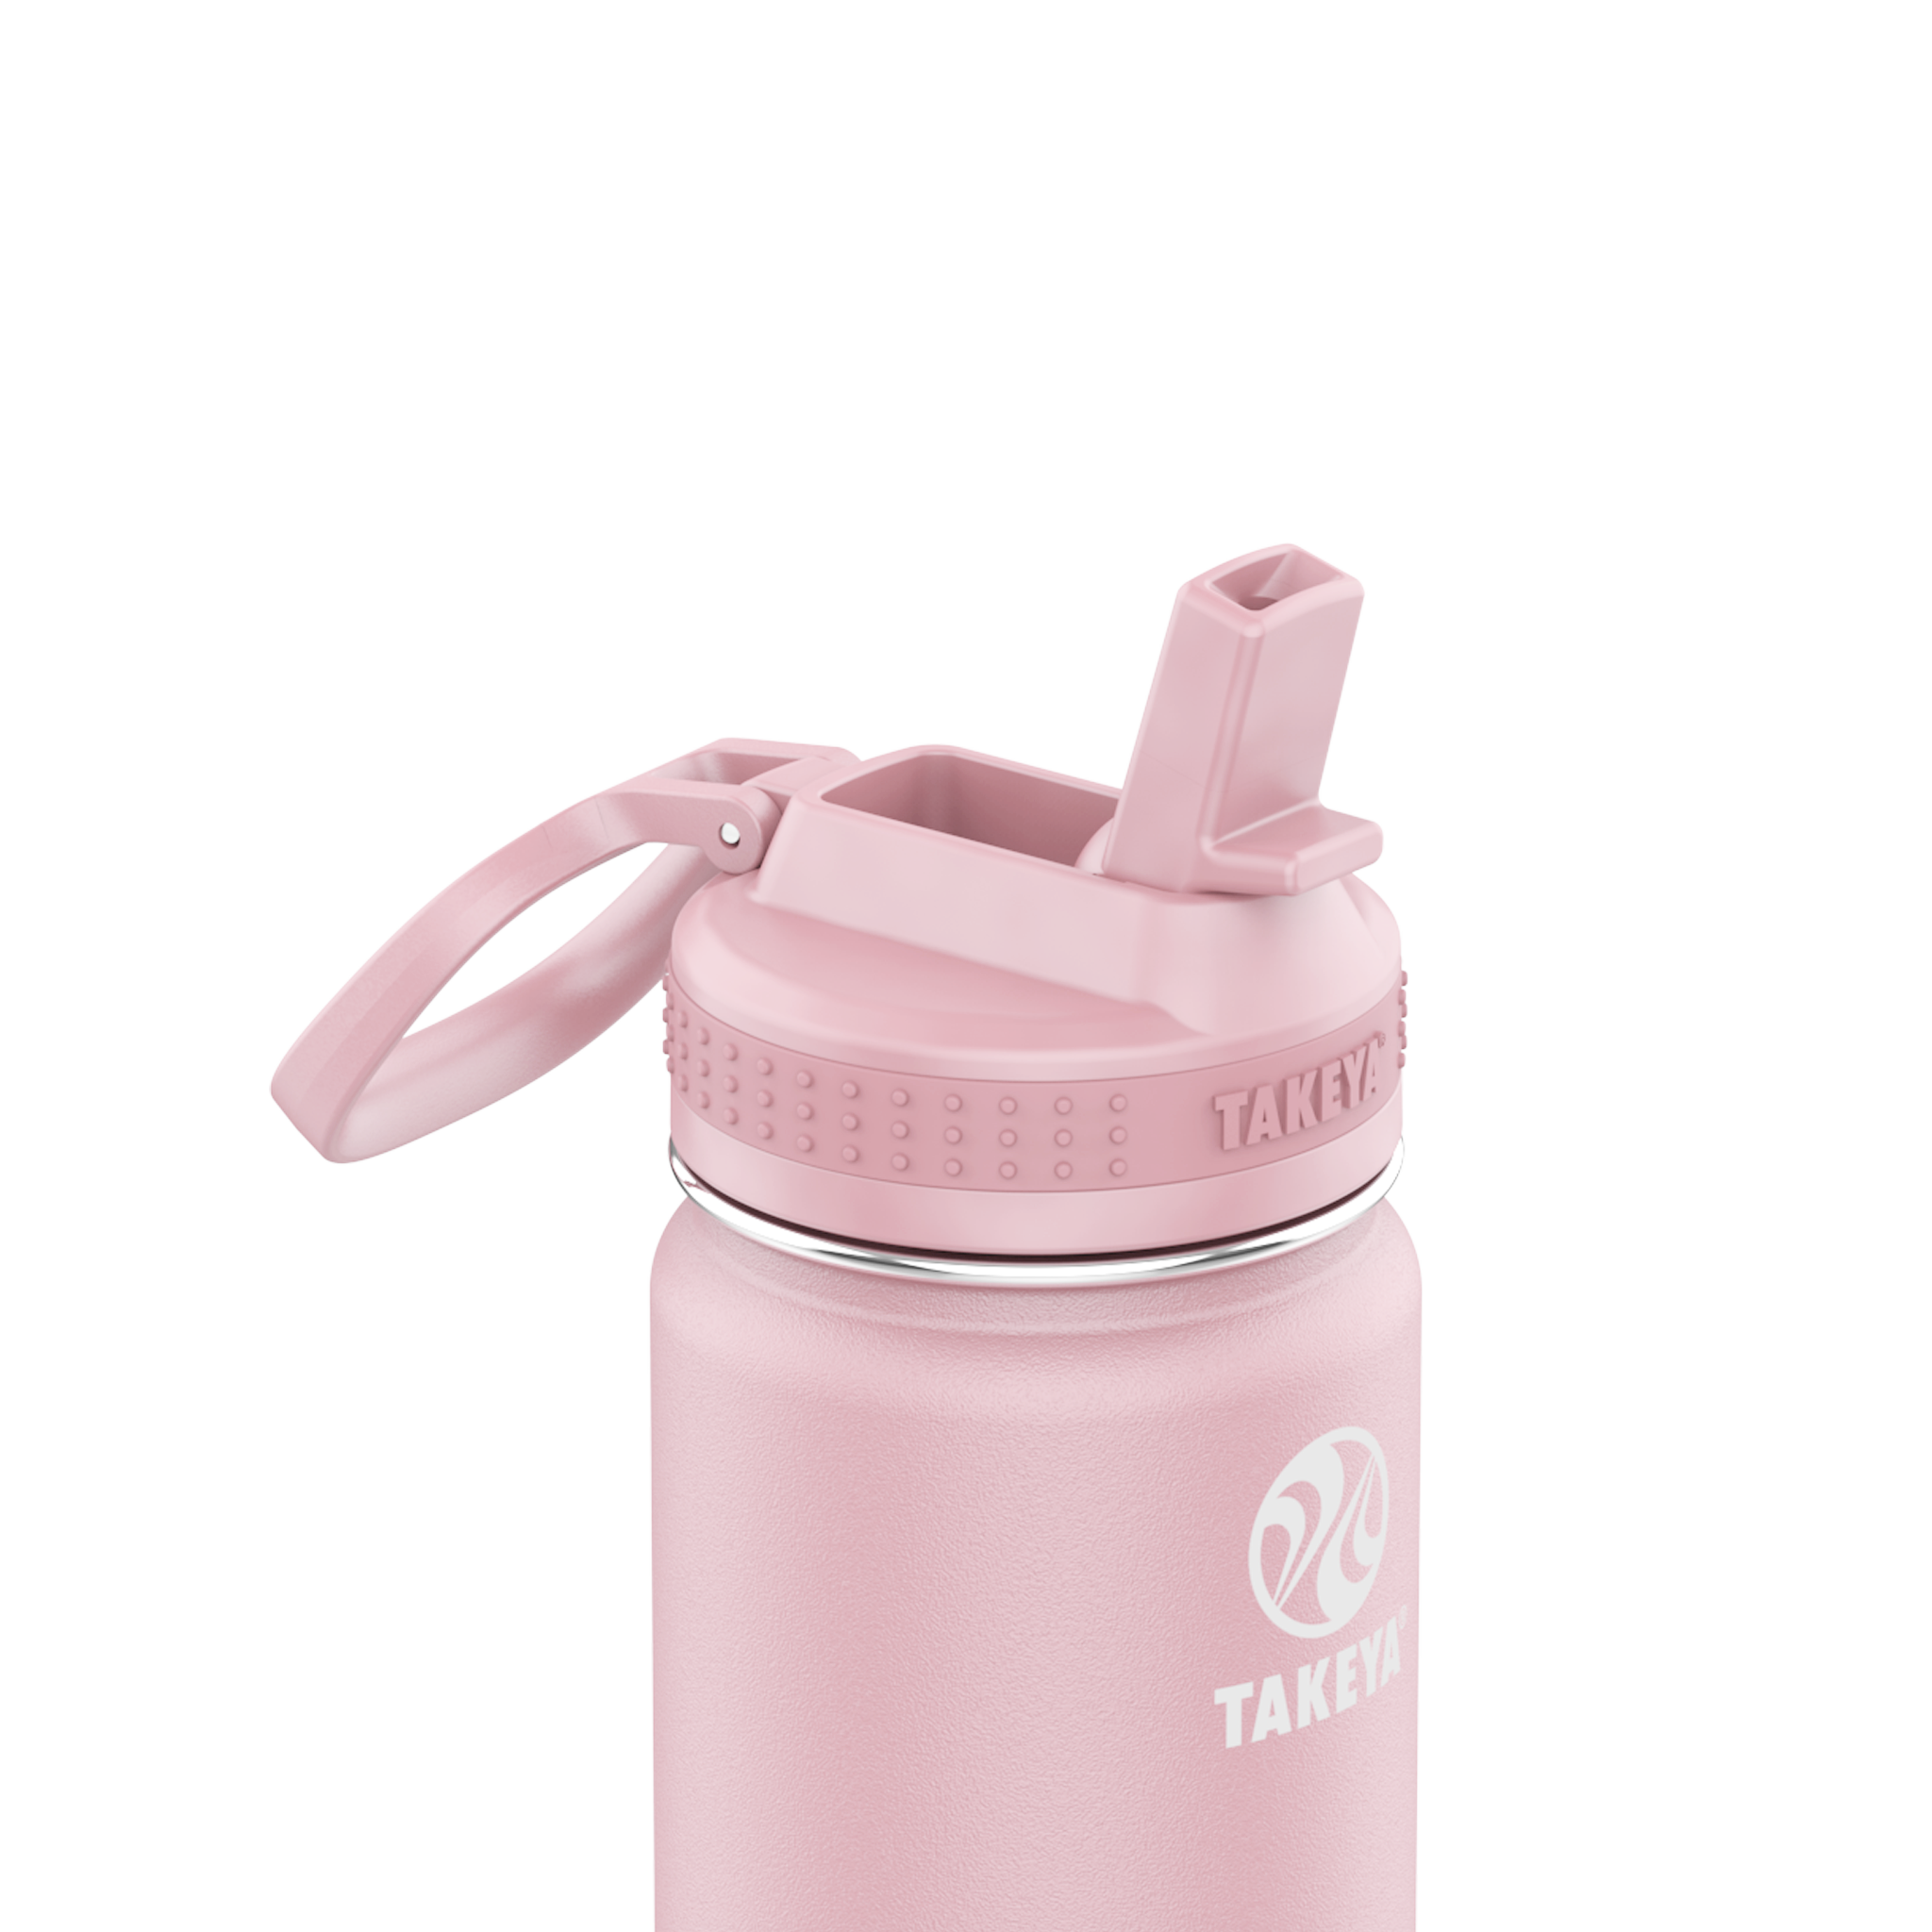 Takeya 24-fl oz Stainless Steel Insulated Water Bottle in the Water Bottles  & Mugs department at